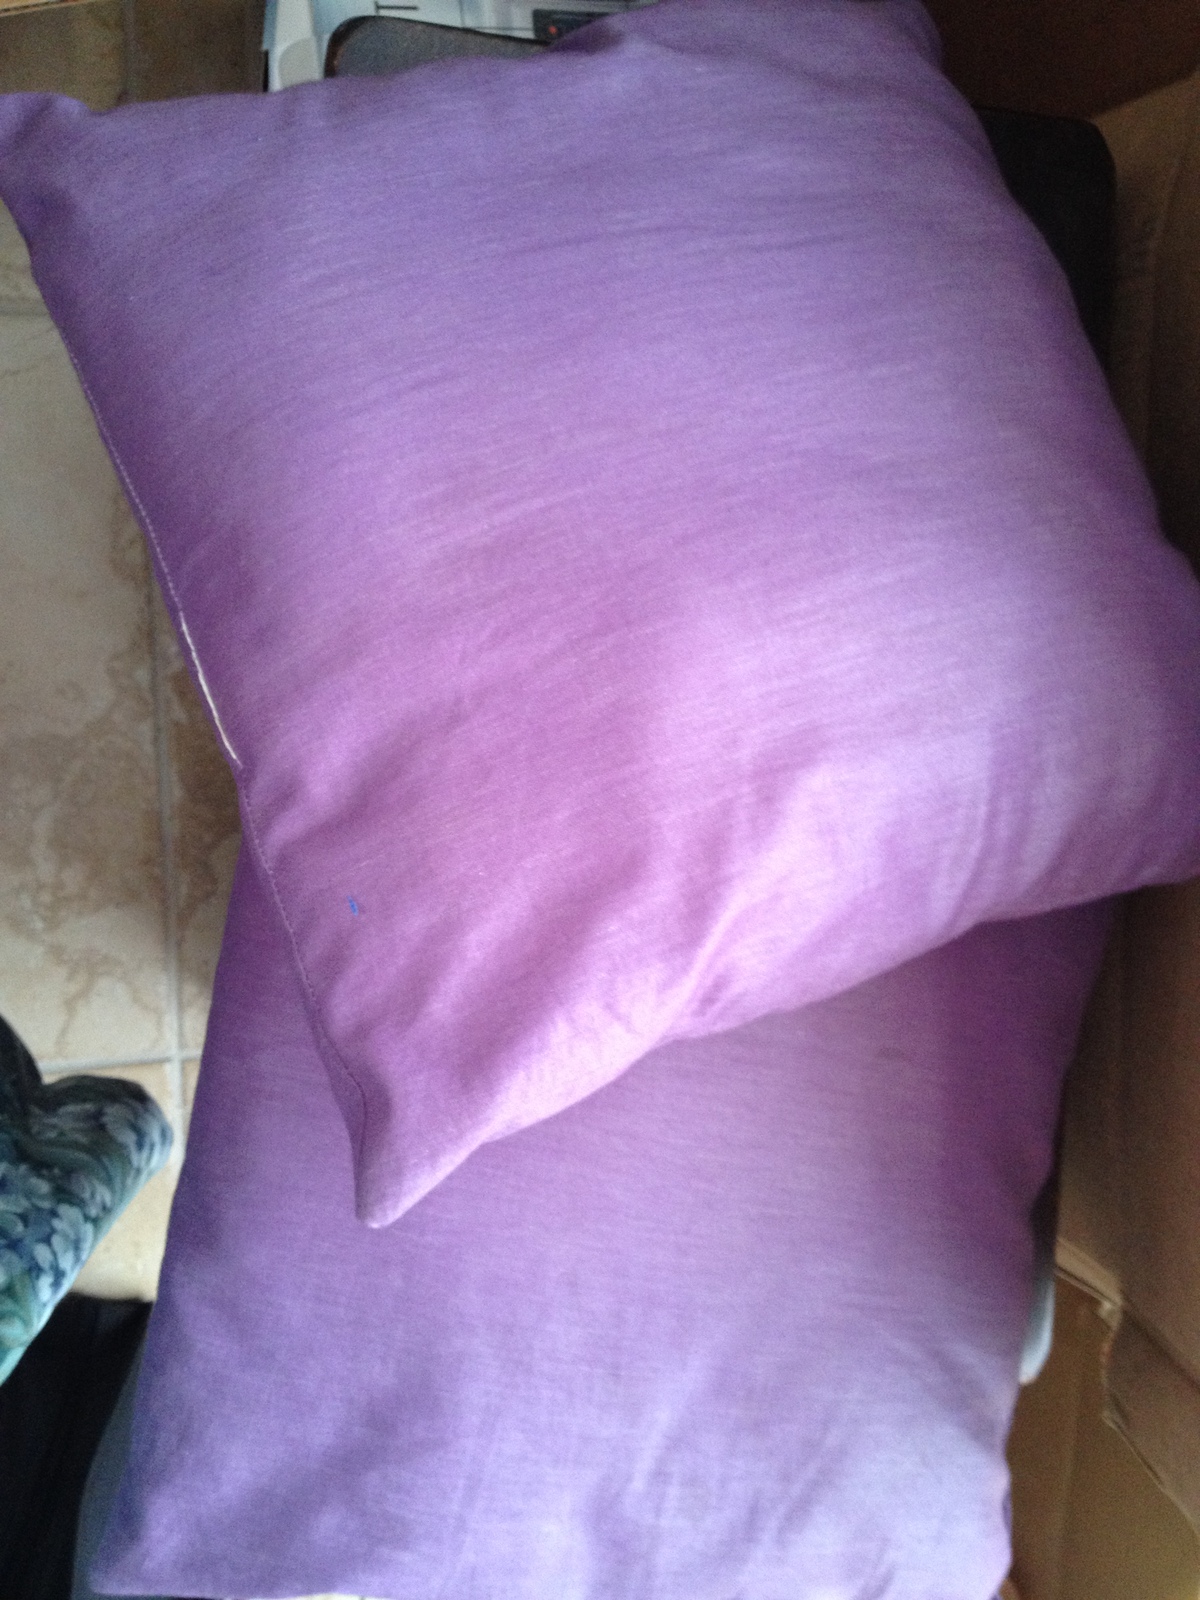 Primary image for set of 4 pillows : light purple decorative pillows